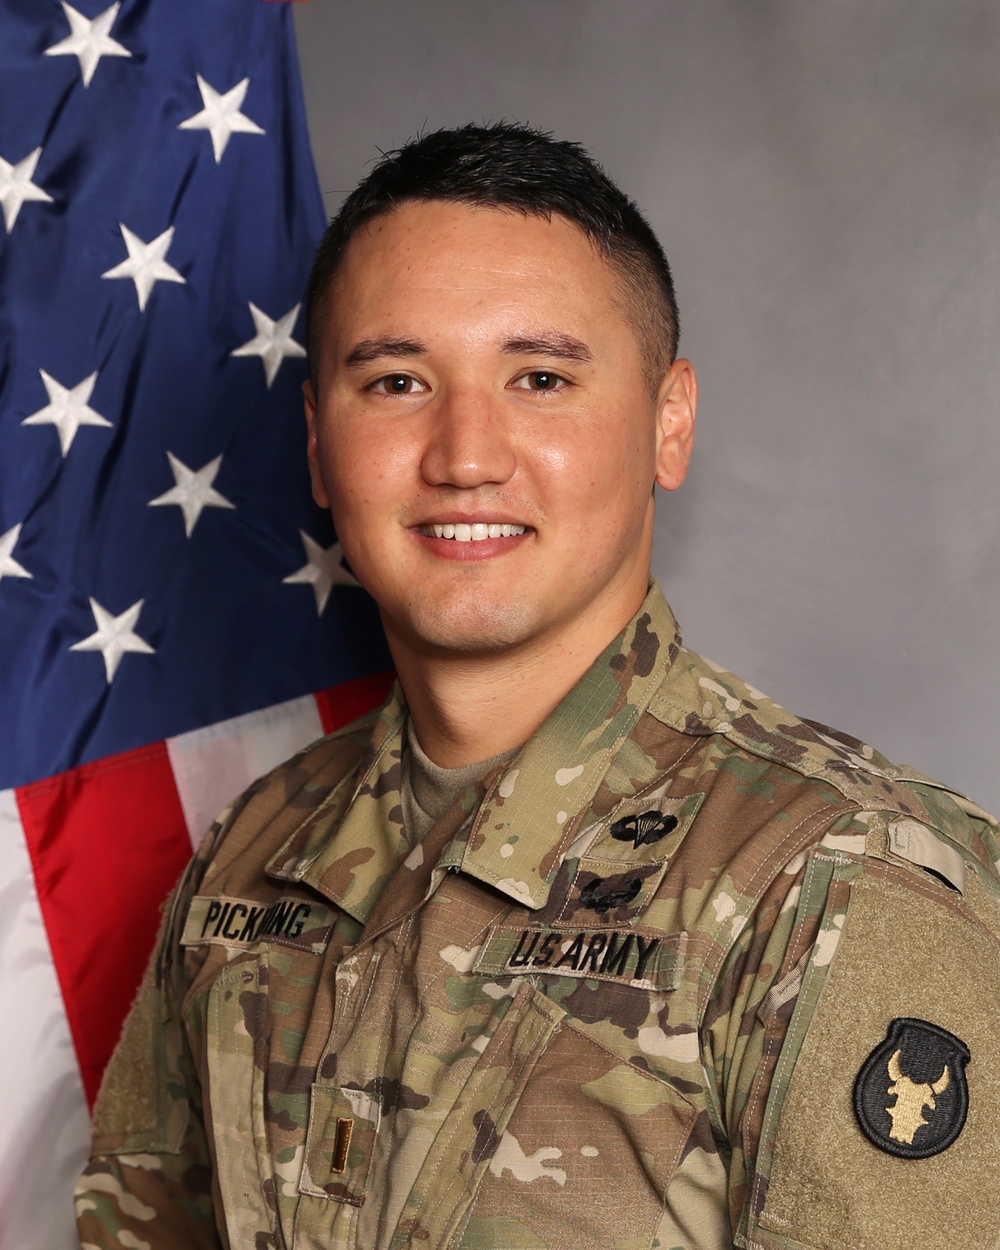 Iowa Army National Guard Soldier